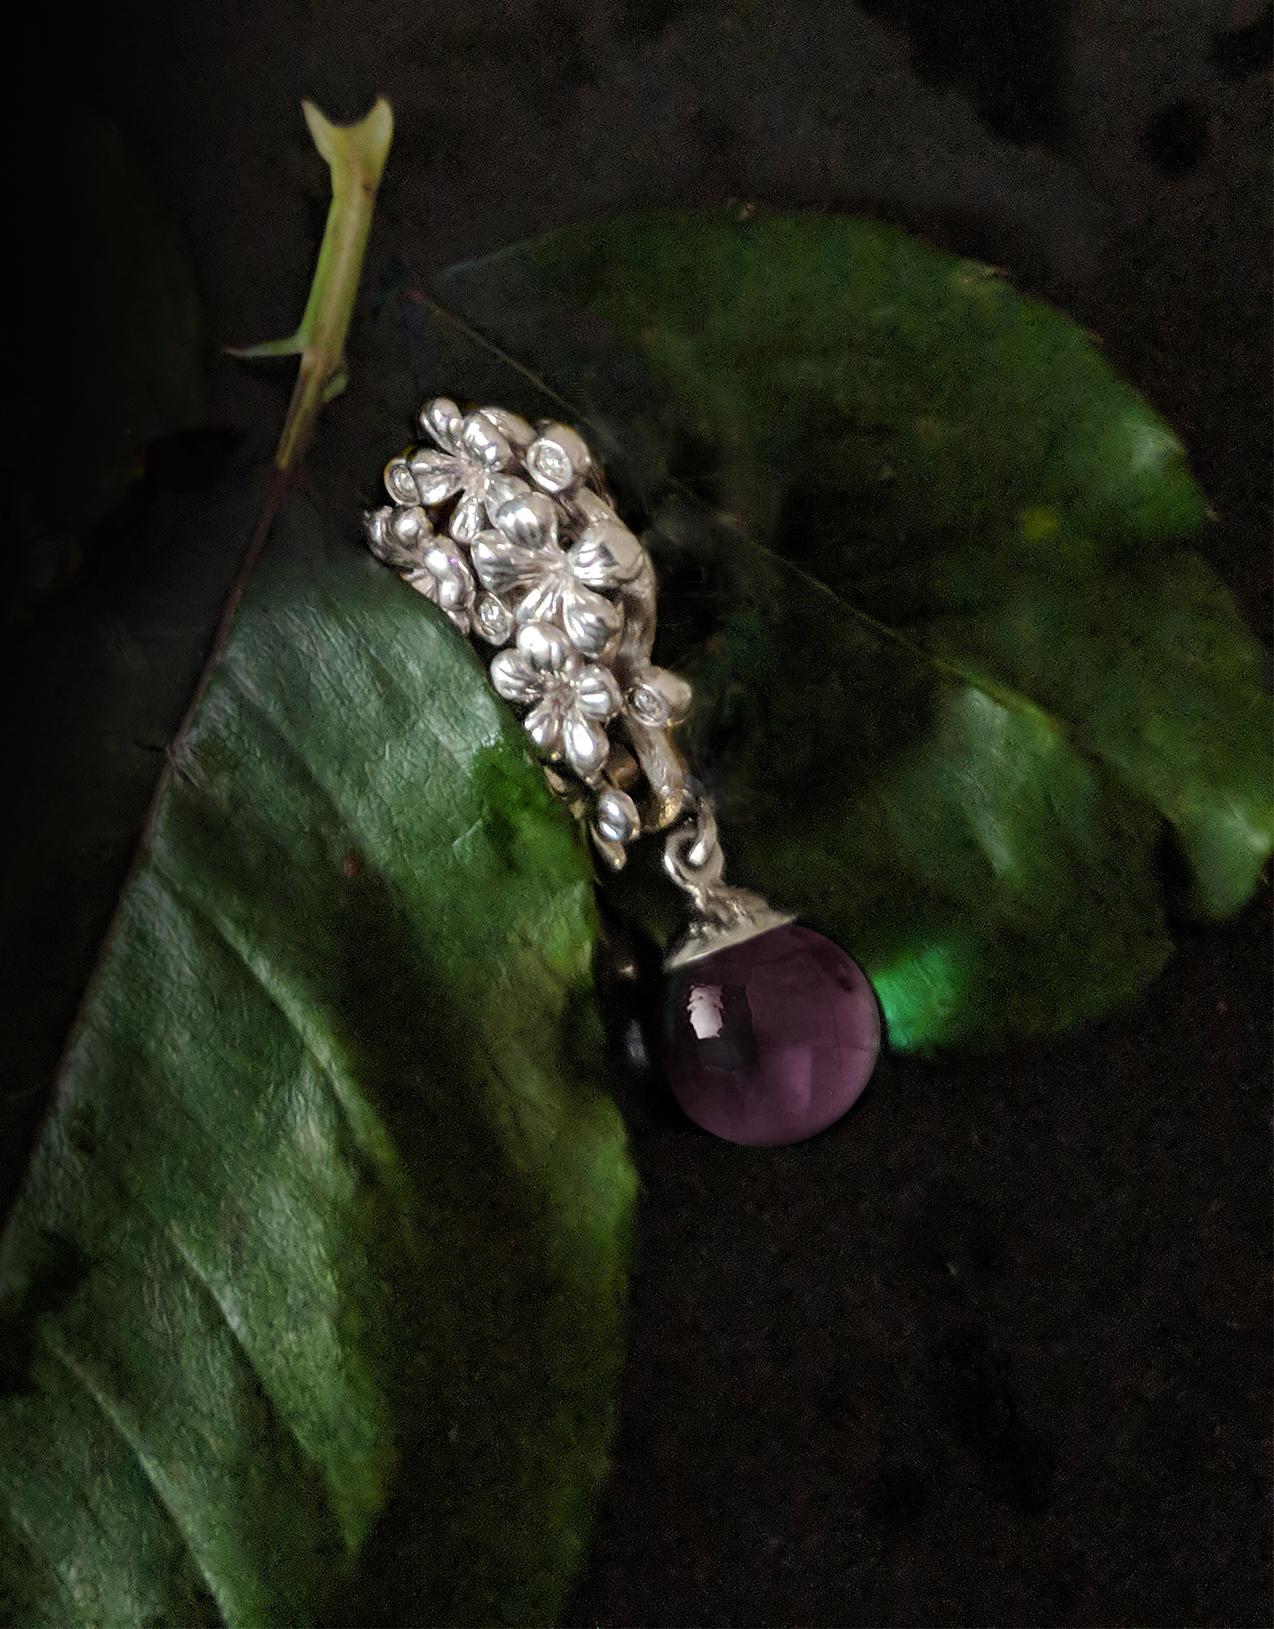 The 18 karat white gold Plum Blossom brooch is encrusted with five round diamonds and a cabochon rose quartz drop, and has been featured in a review by Vogue UA. We use only top-quality natural diamonds of VS clarity and F-G color, sourced from a